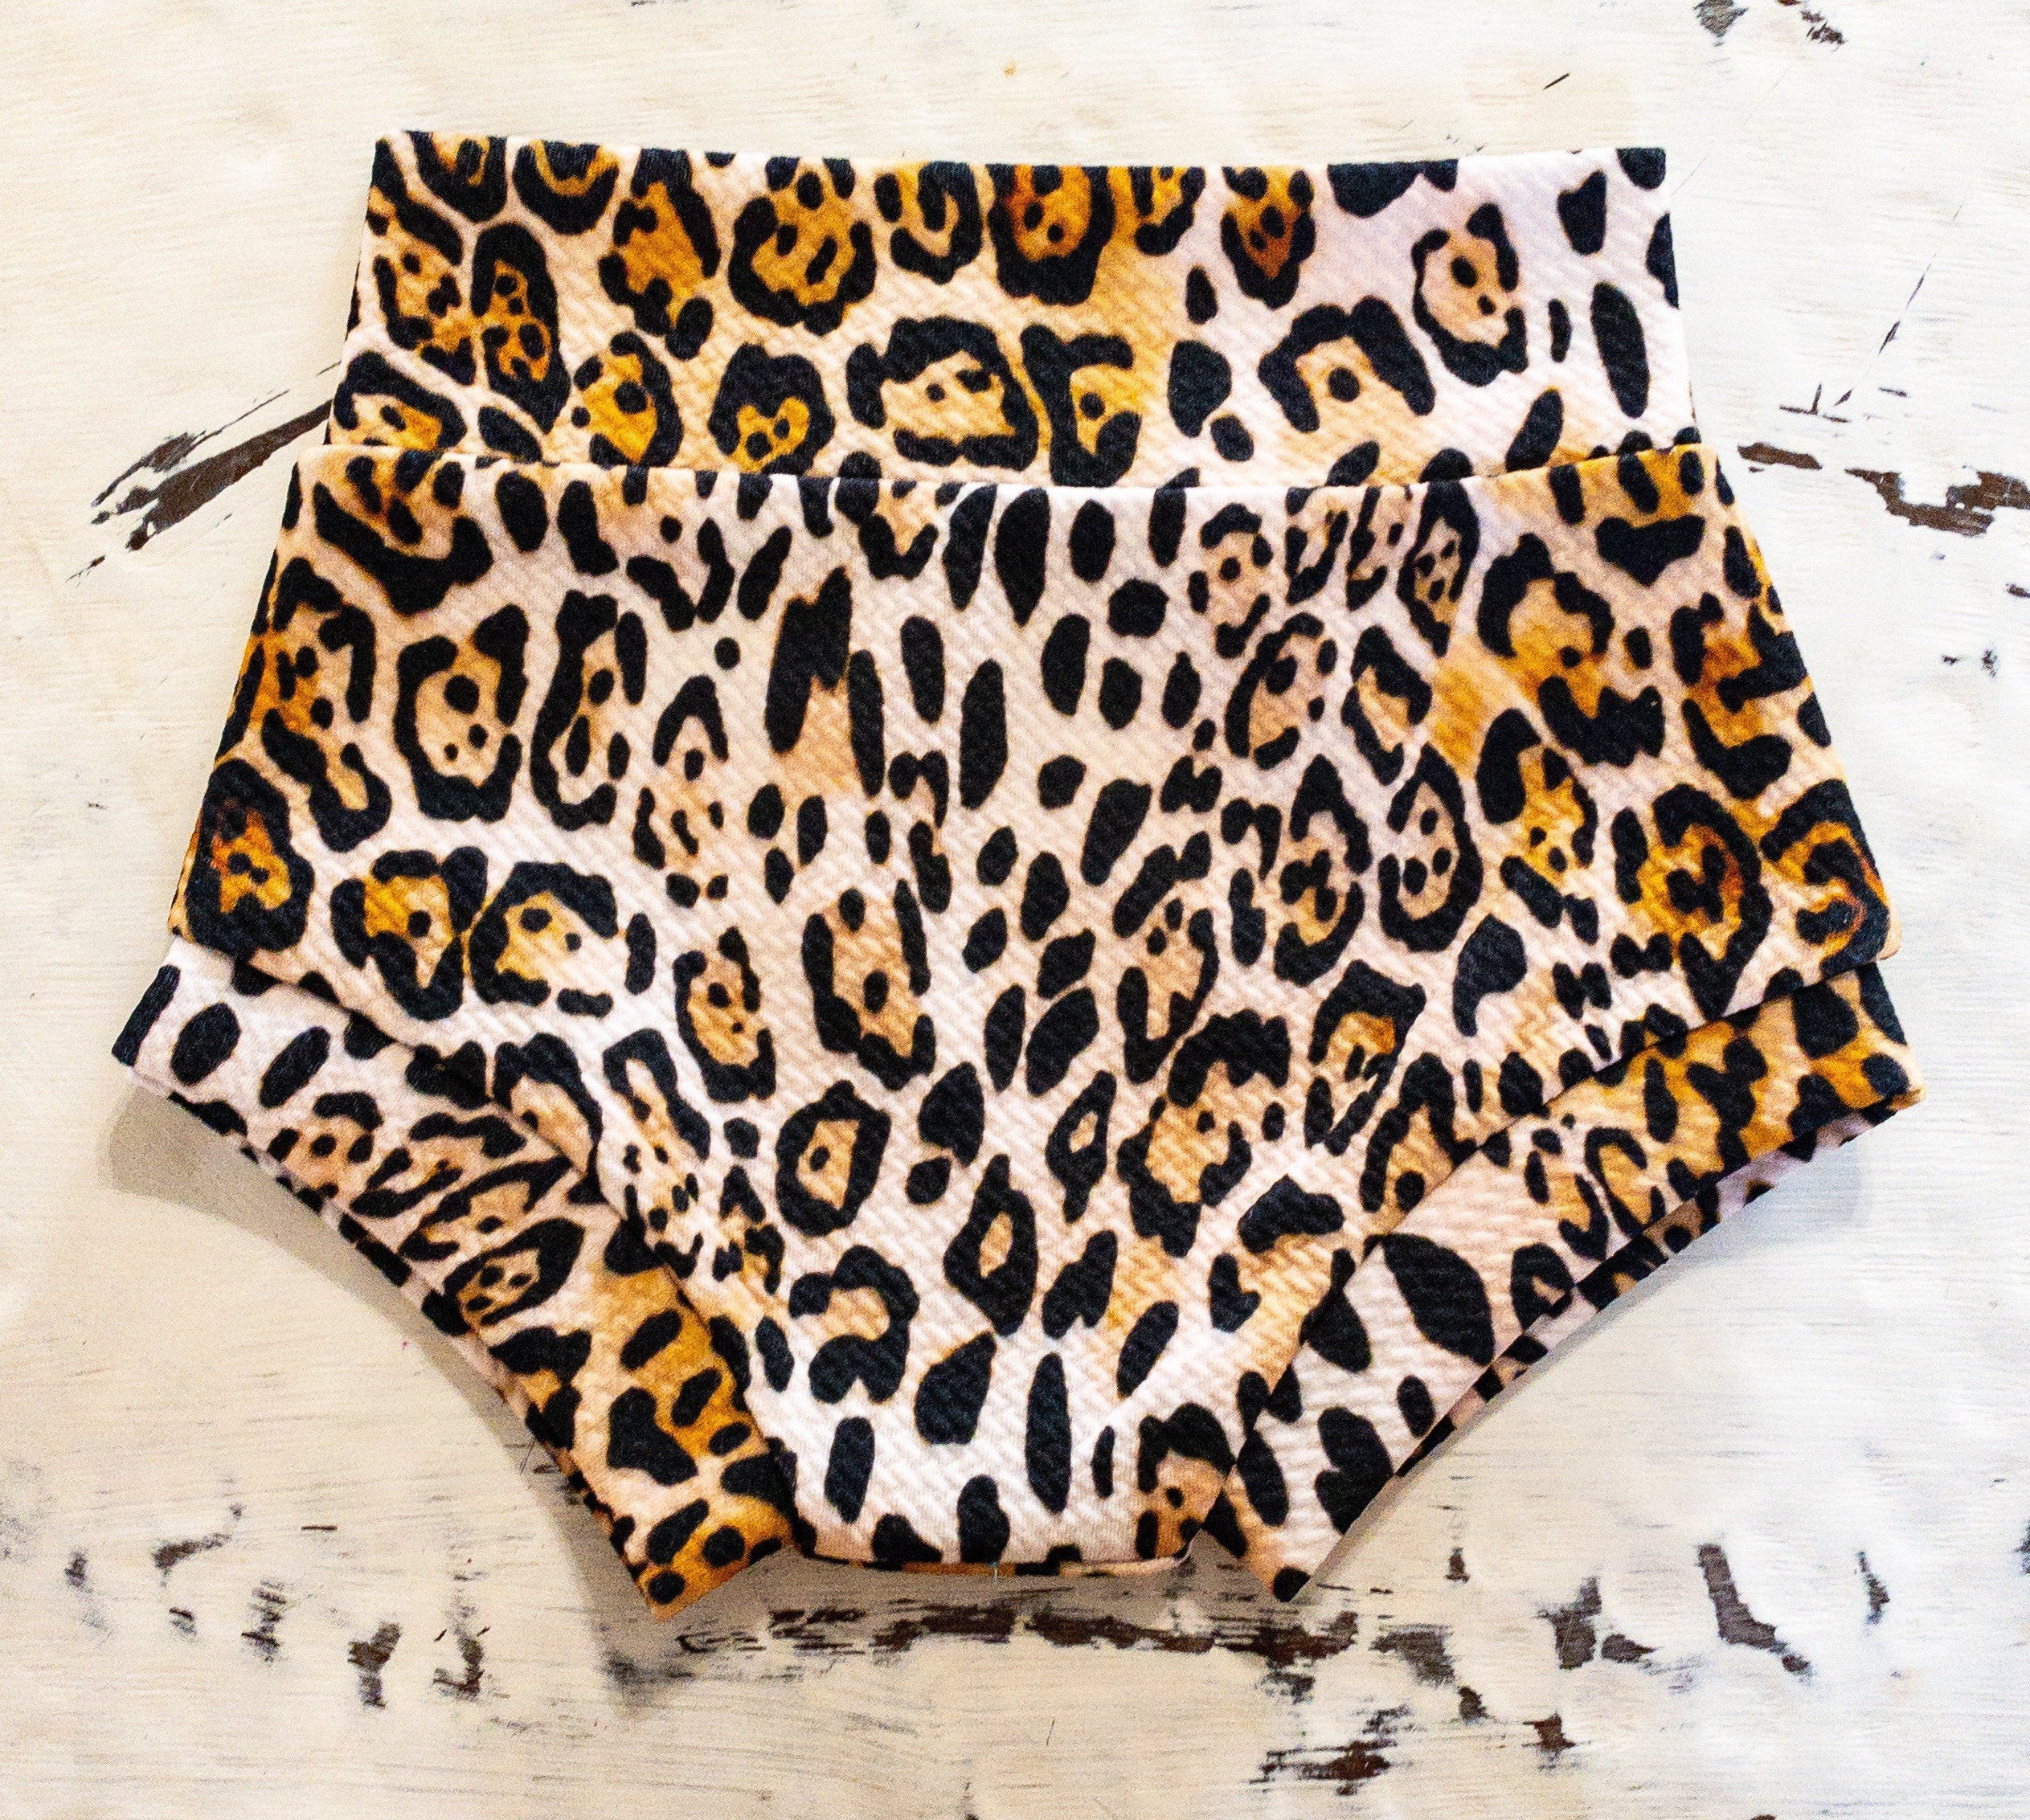 Leopard Print Cheetah Bummie with Fringe or No Fringe